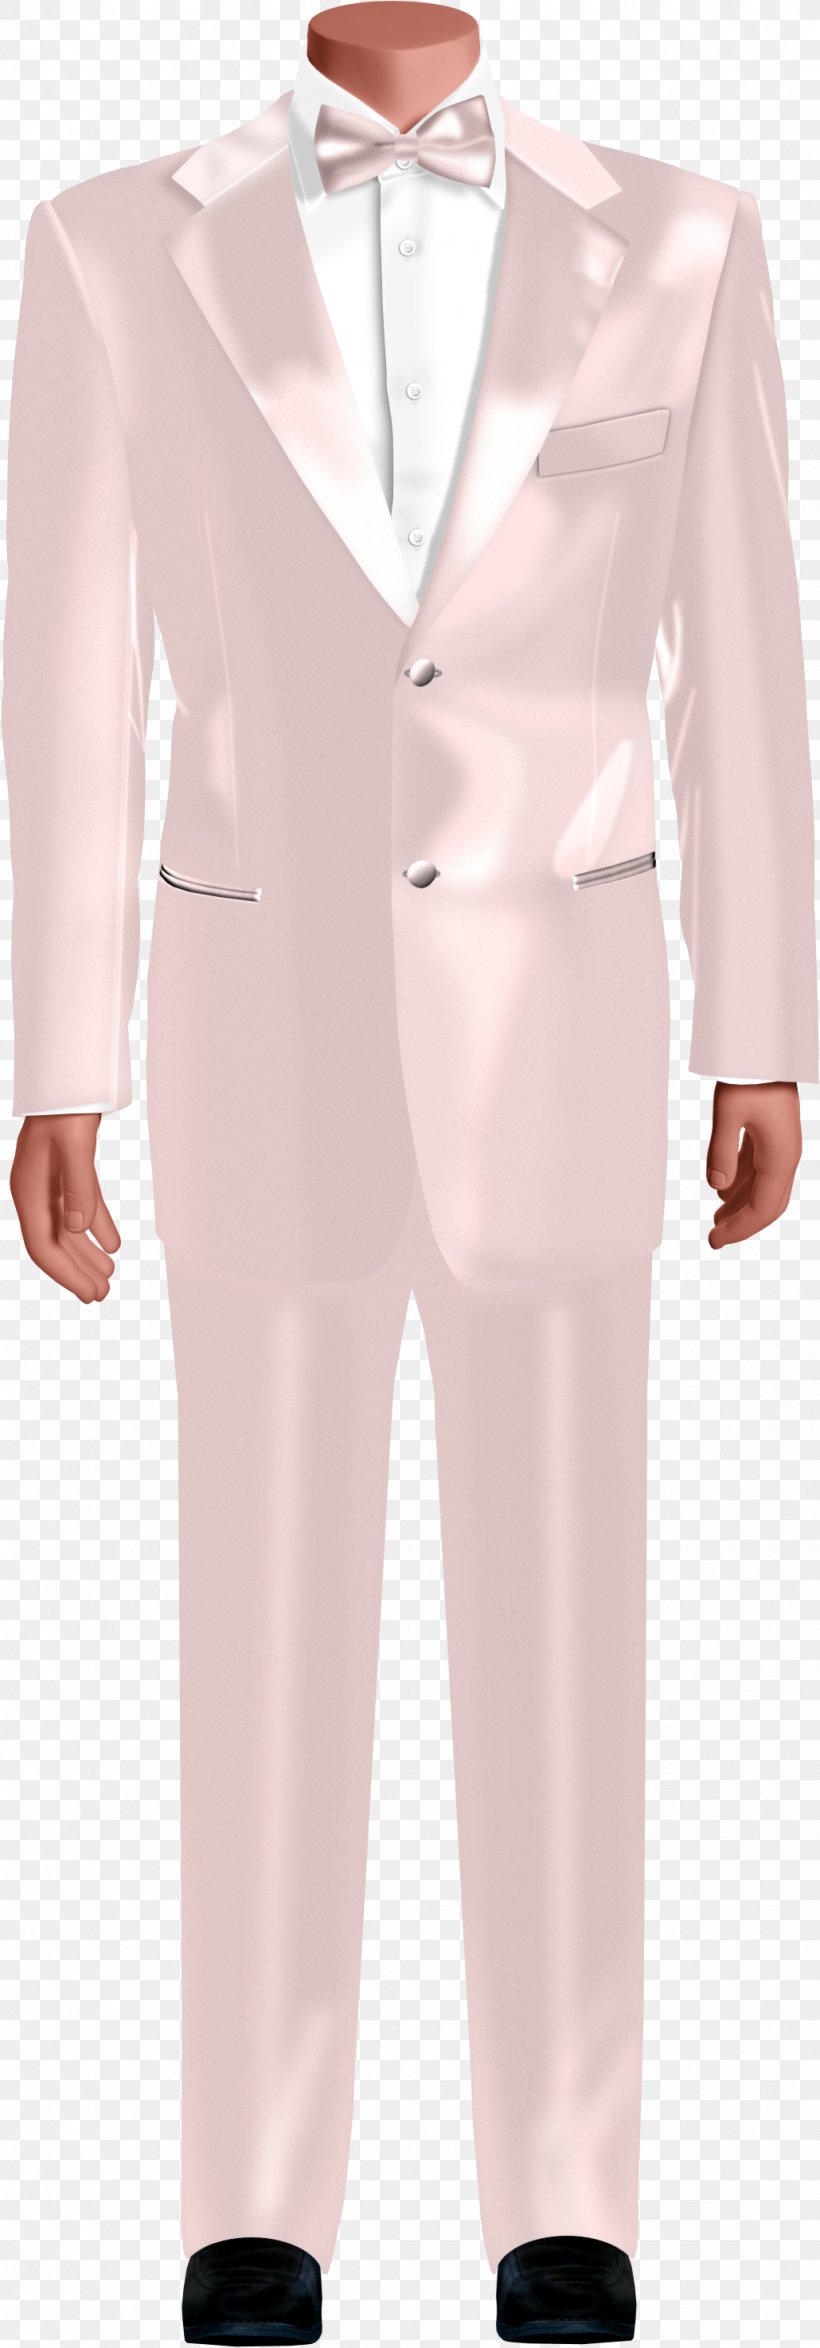 Tuxedo Suit Pajamas Formal Wear, PNG, 1030x2950px, Tuxedo, Clothing, Costume, Drawing, Formal Wear Download Free